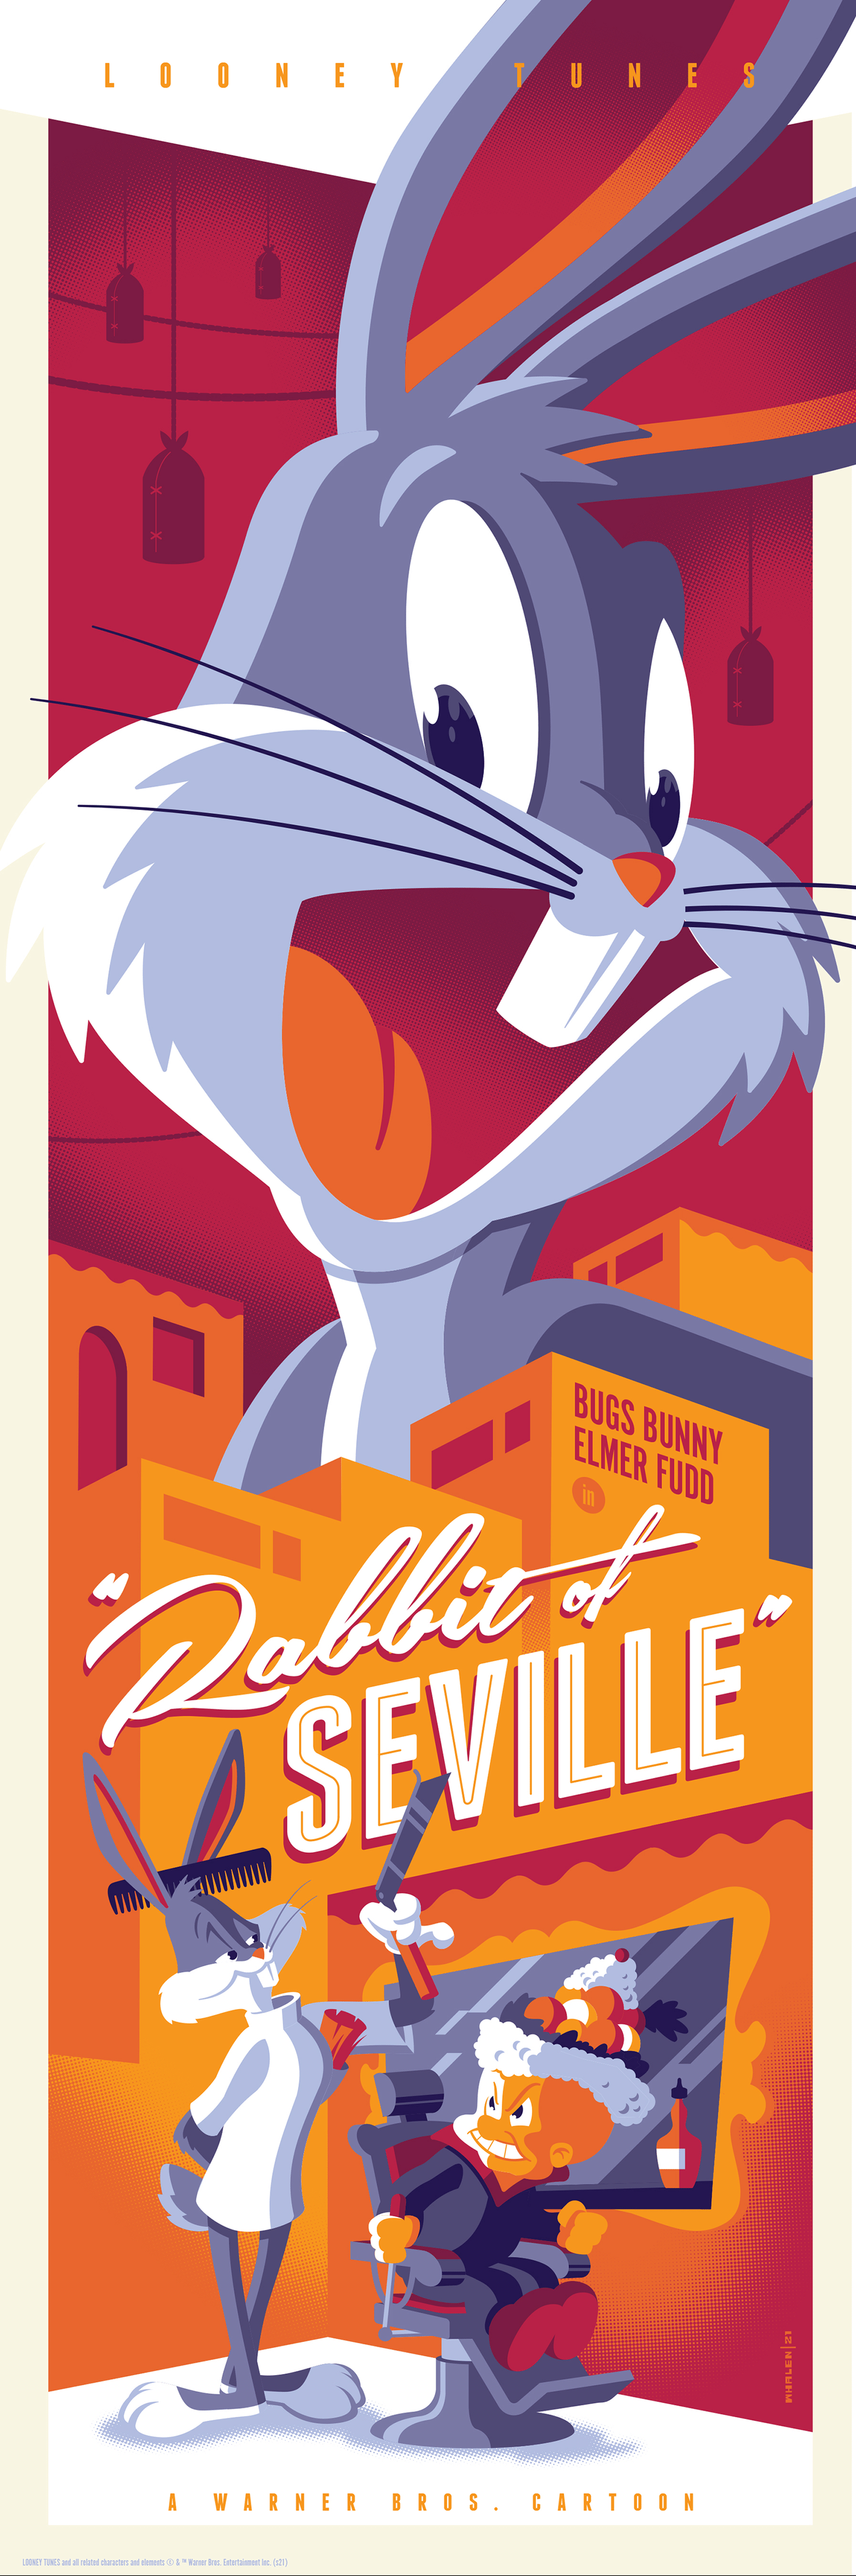 Bugs Bunny and Daffy Duck team up to take down a giant seagull in this poster for the 1981 film 